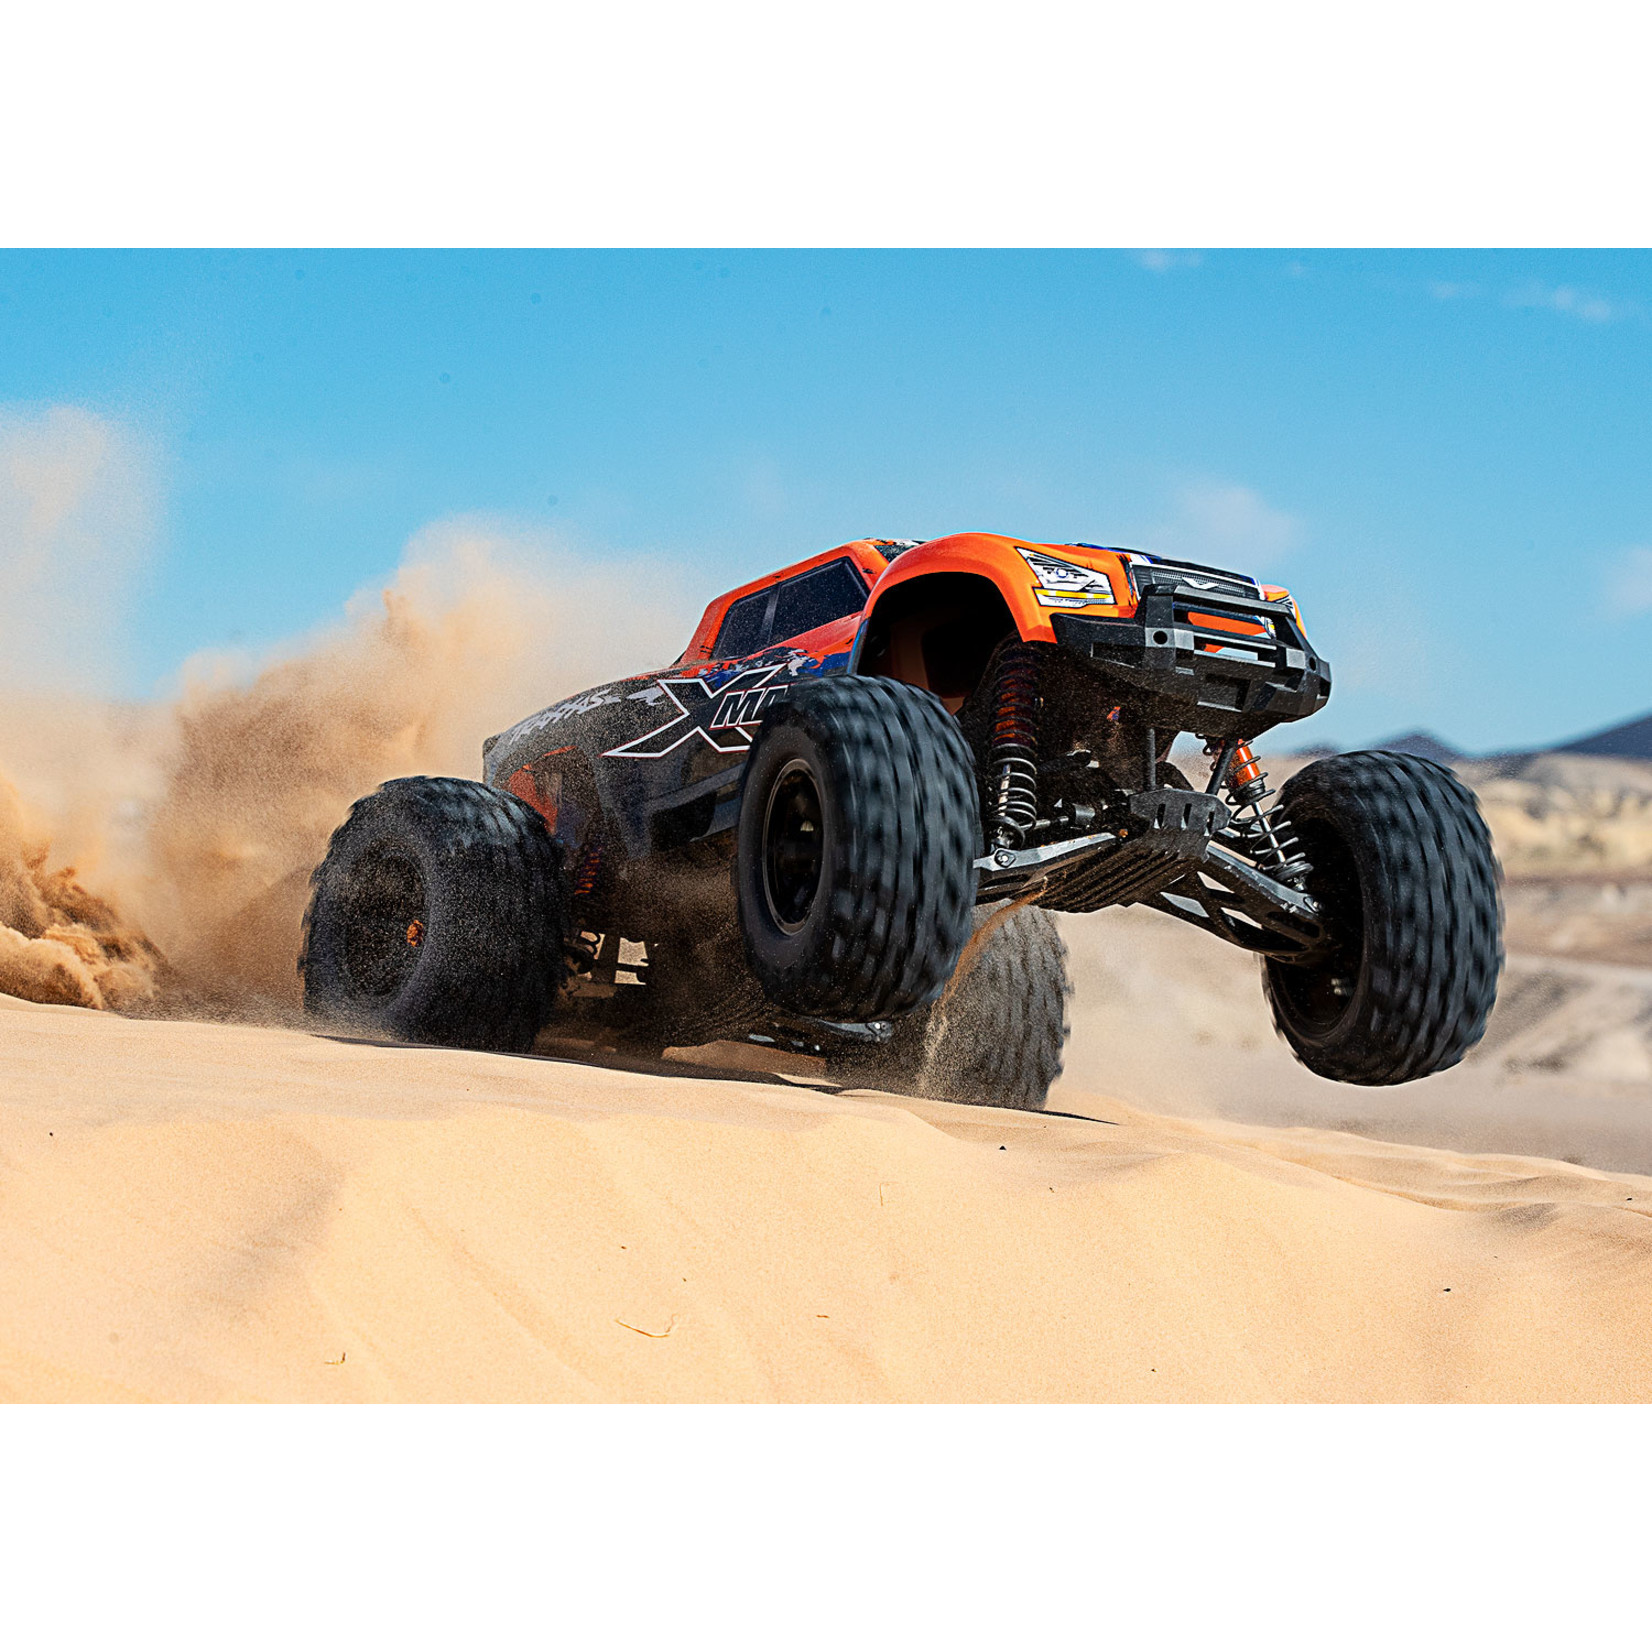 Traxxas X-Maxx: Brushless Electric Monster Truck with Traxxas Stability Management (TSM)